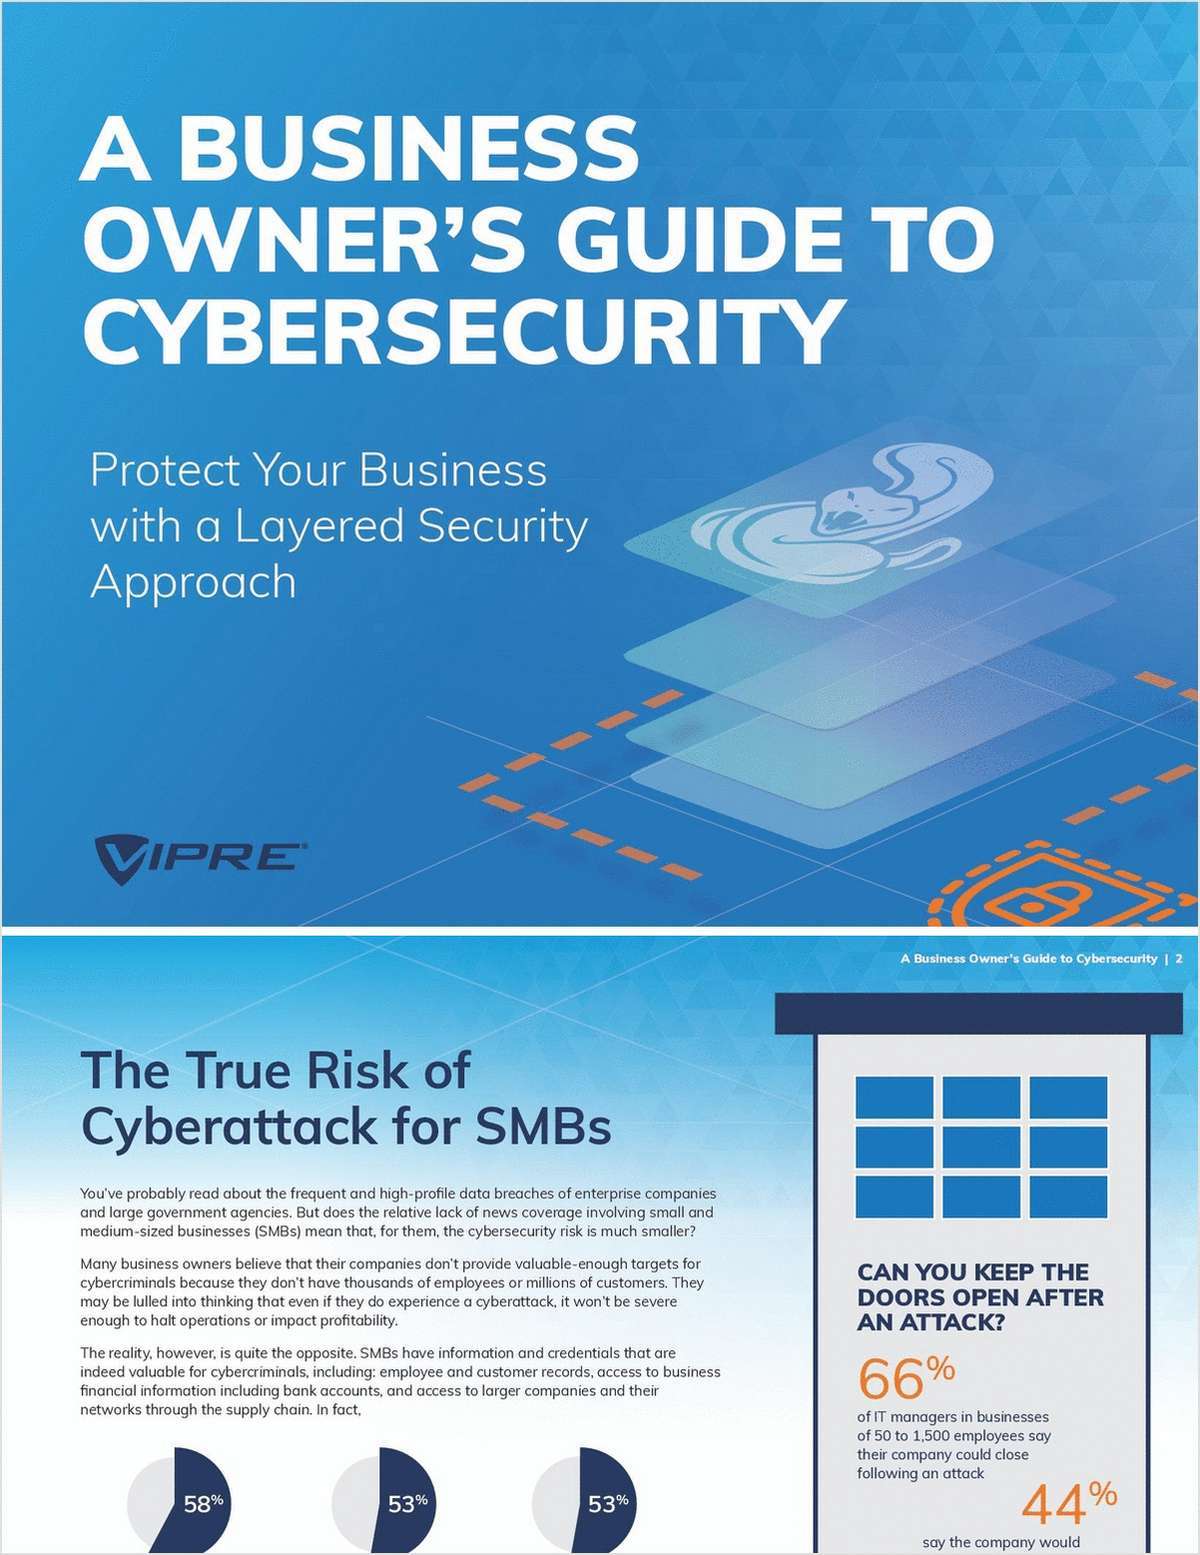 A Business Owner's Guide to Cybersecurity